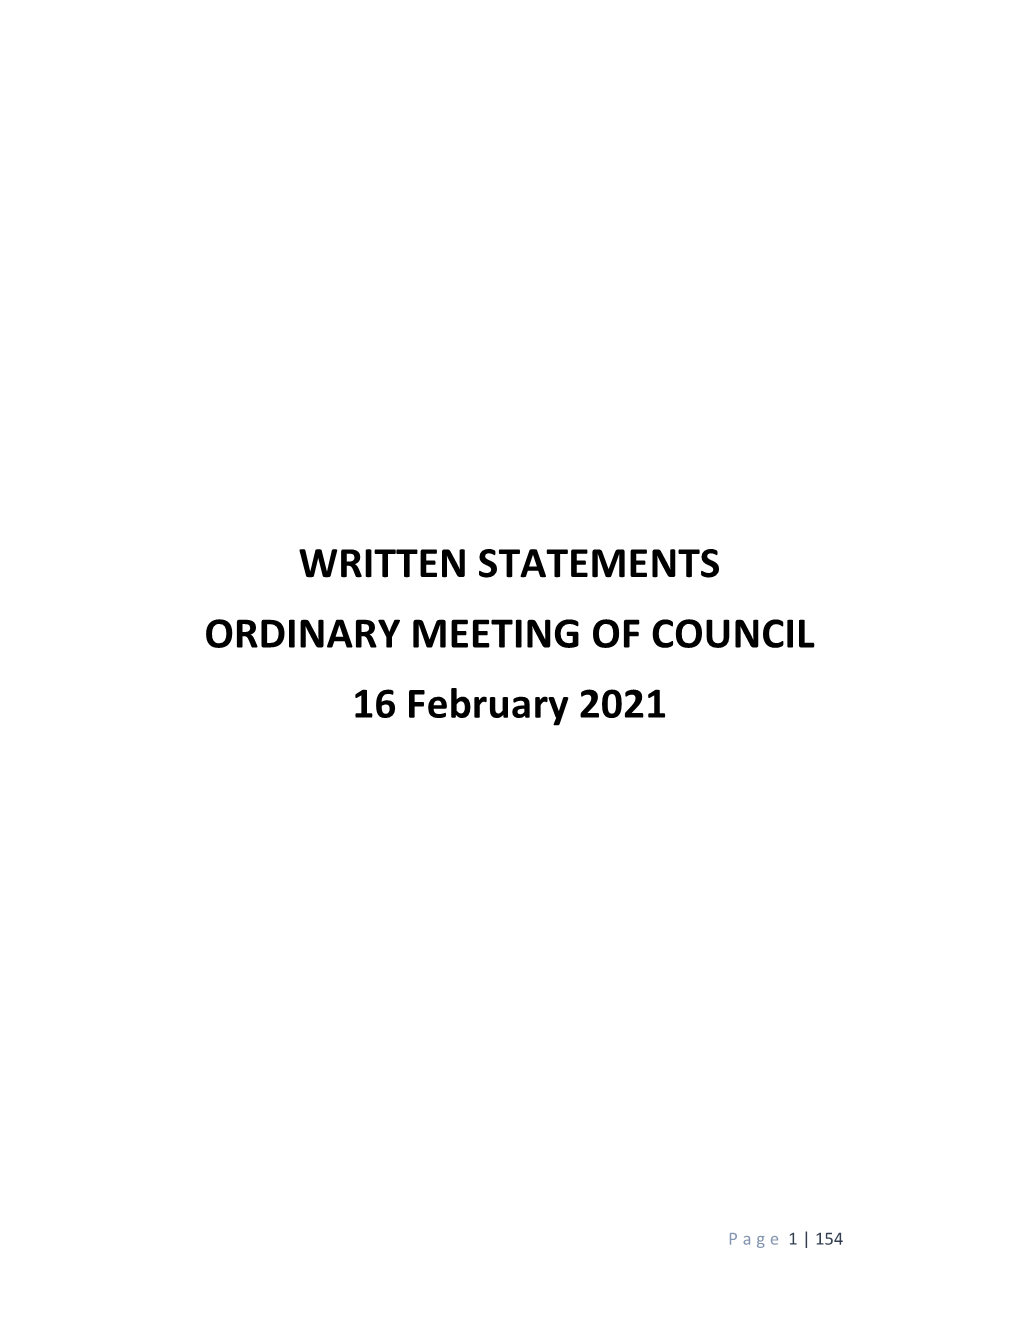 WRITTEN STATEMENTS ORDINARY MEETING of COUNCIL 16 February 2021